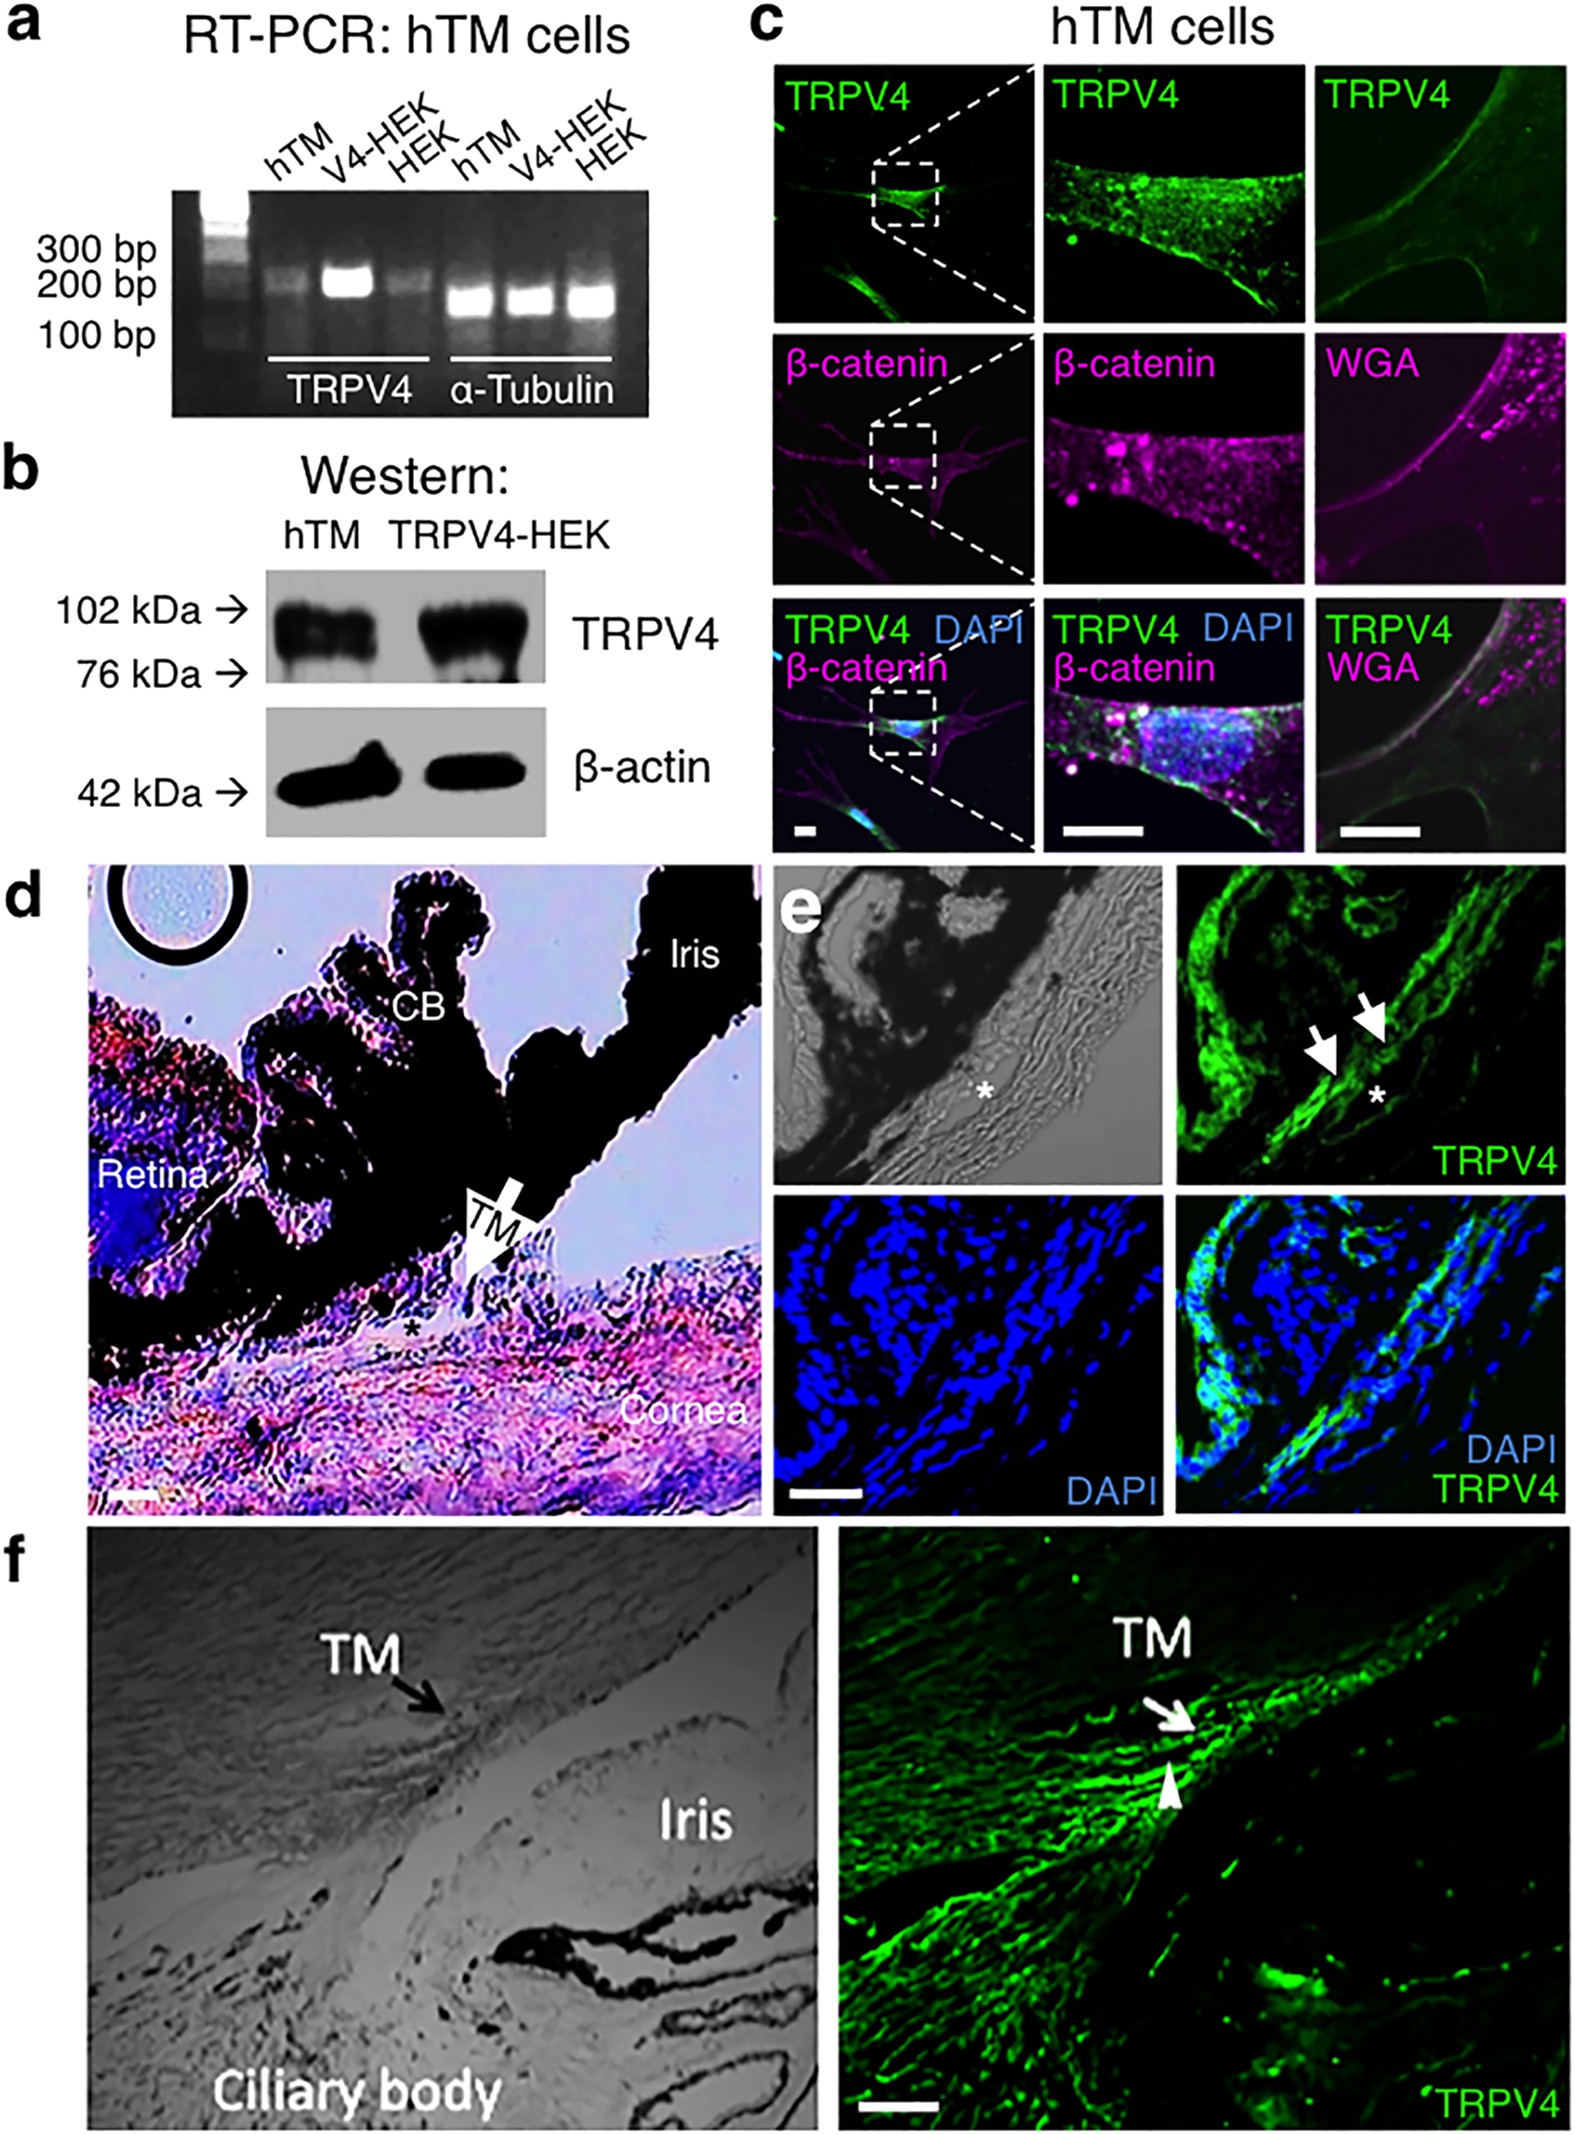 TRPV4 regulates calcium homeostasis, cytoskeletal remodeling, conventional outflow and intraocular pressure in the mammalian eye Scientific Reports